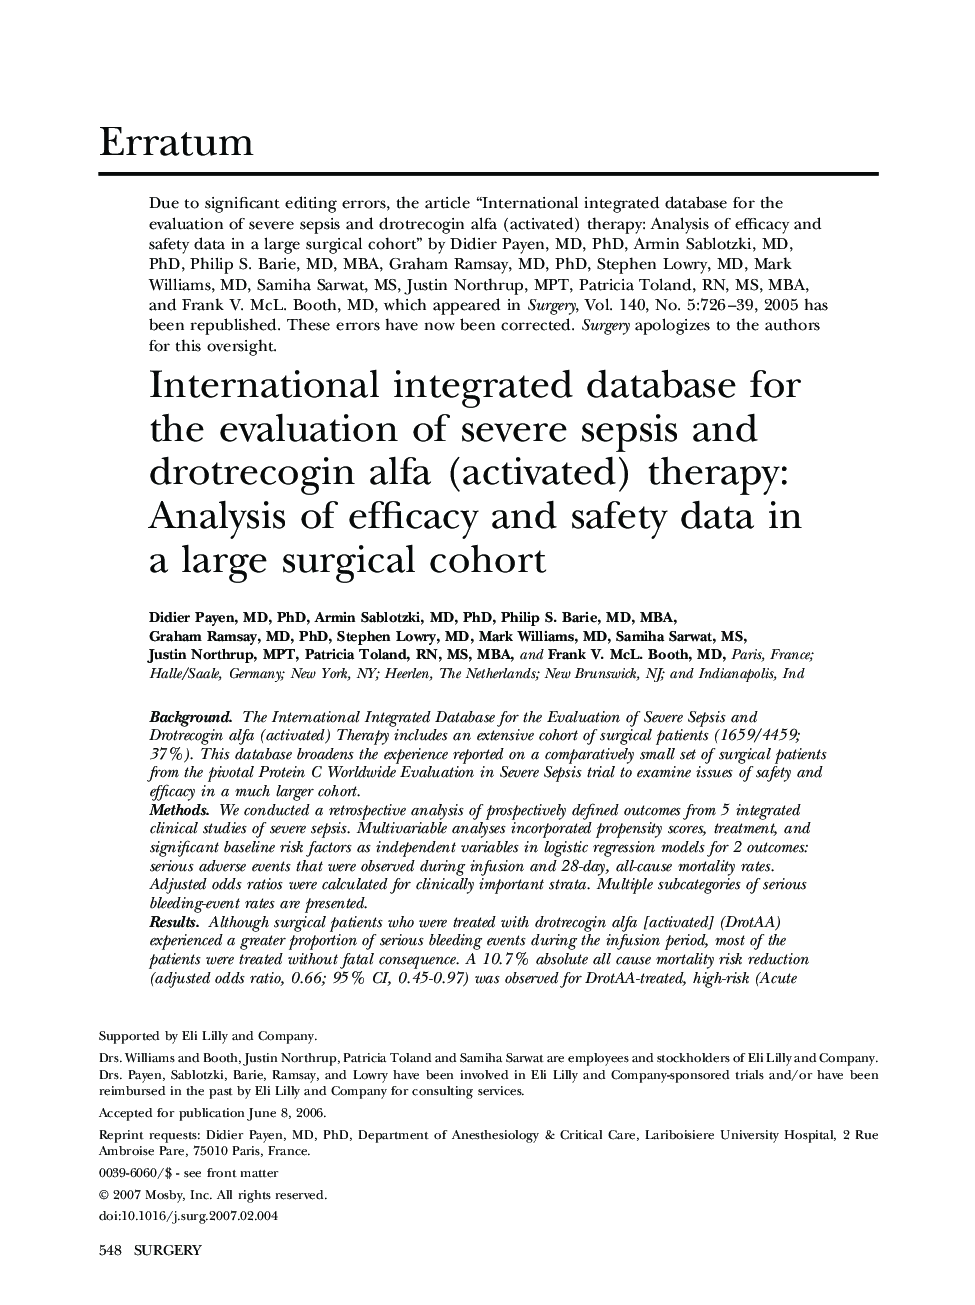 International integrated database for the evaluation of severe sepsis and drotrecogin alfa (activated) therapy: Analysis of efficacy and safety data in a large surgical cohort 